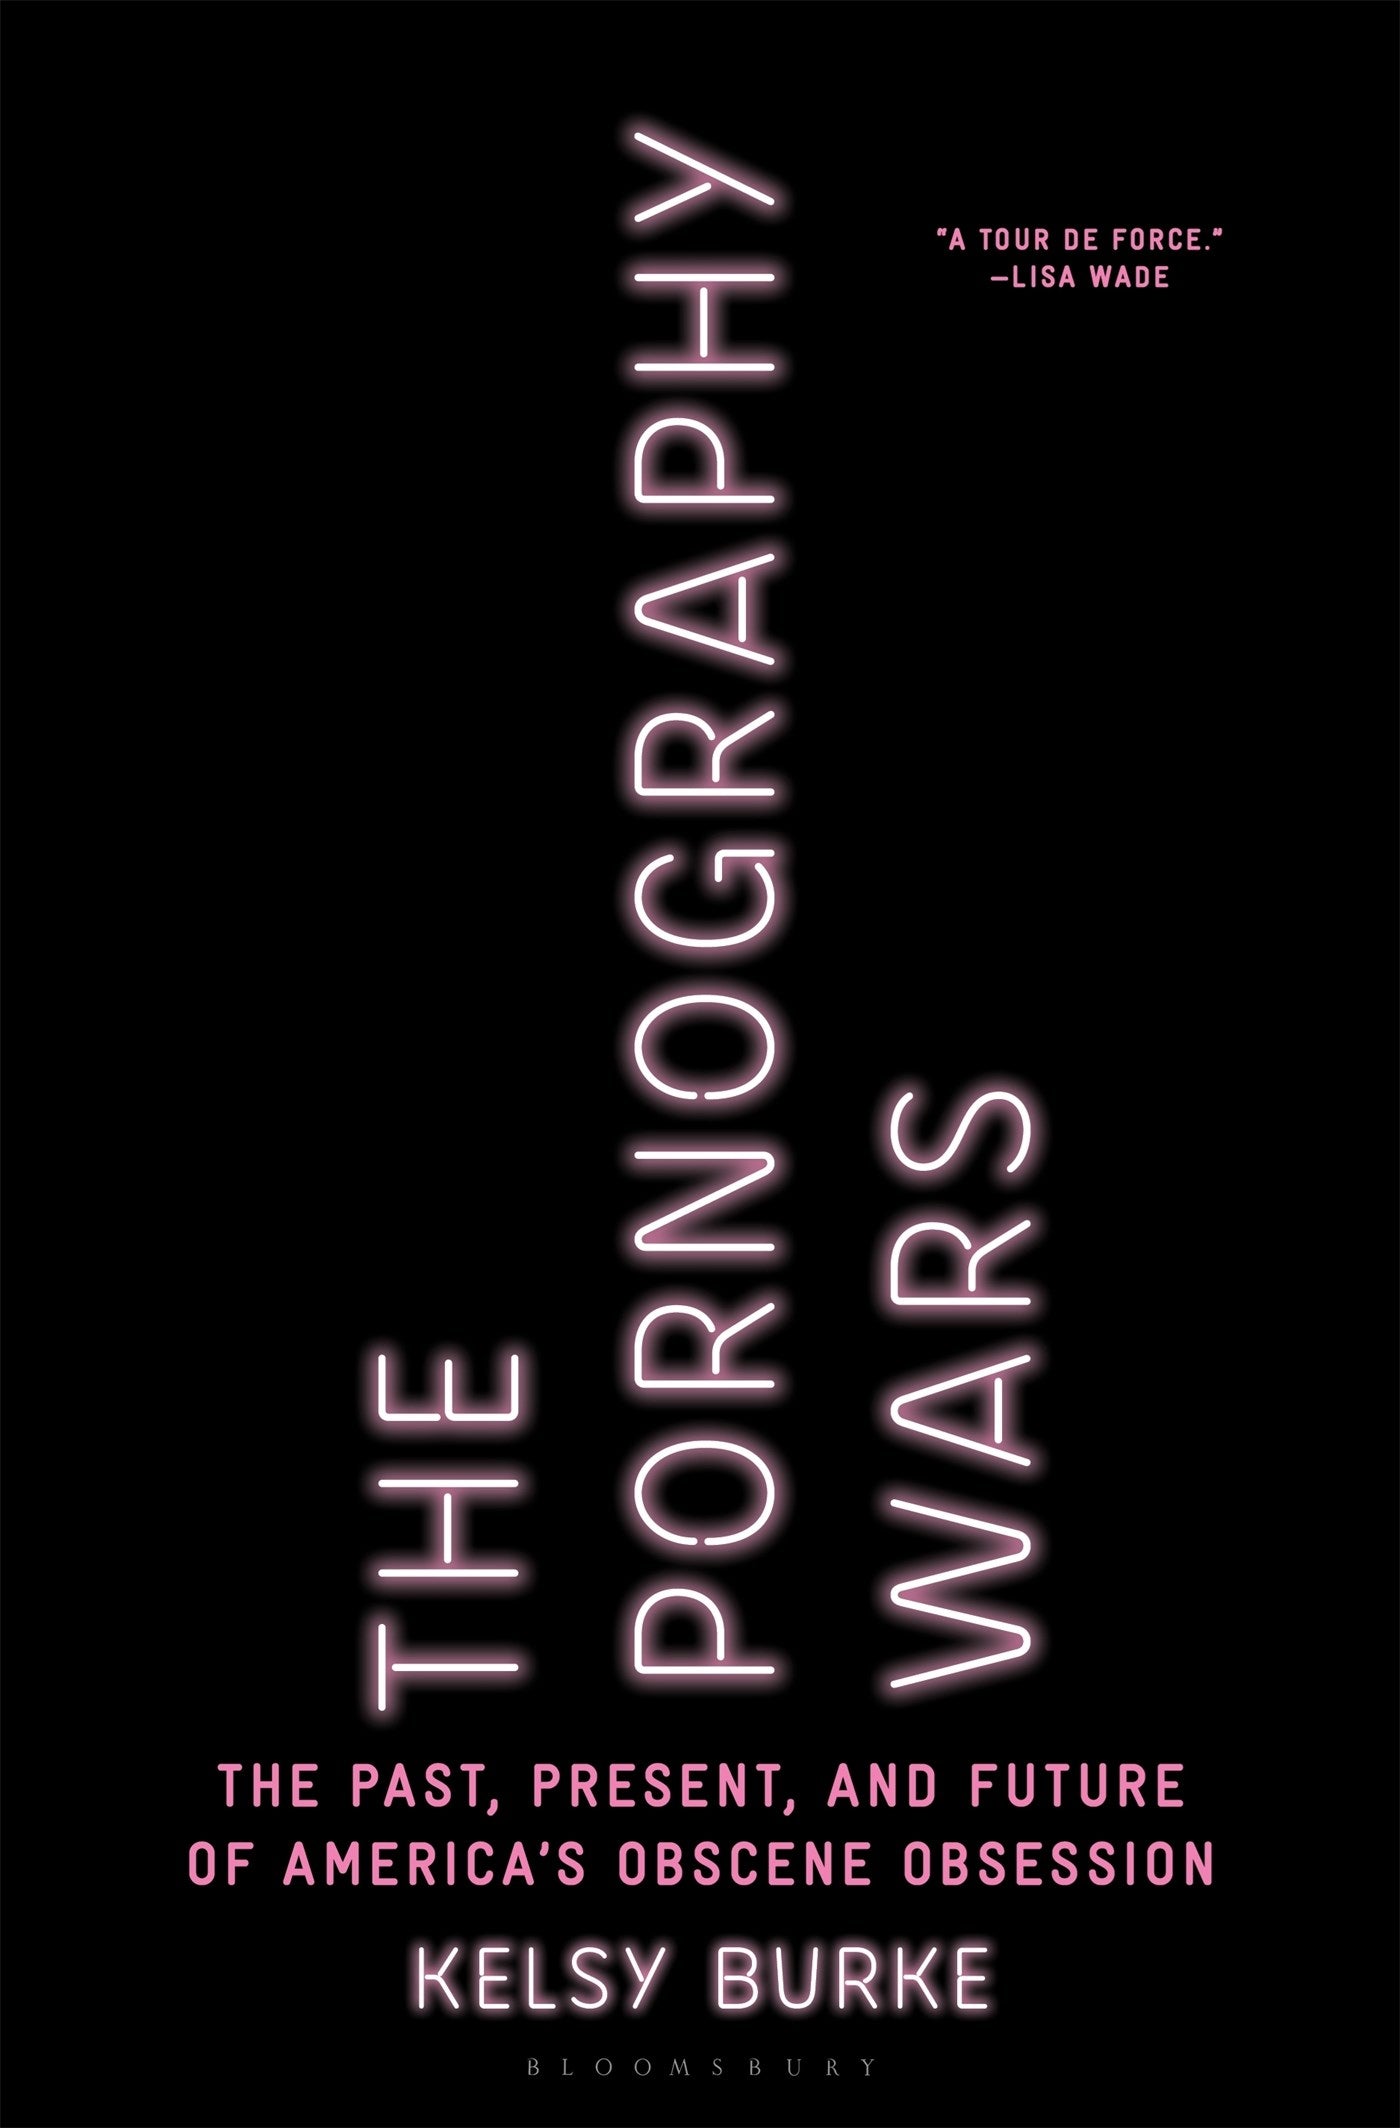 The Pornography Wars: The Past, Present, and Future of America’s Obscene Obsession